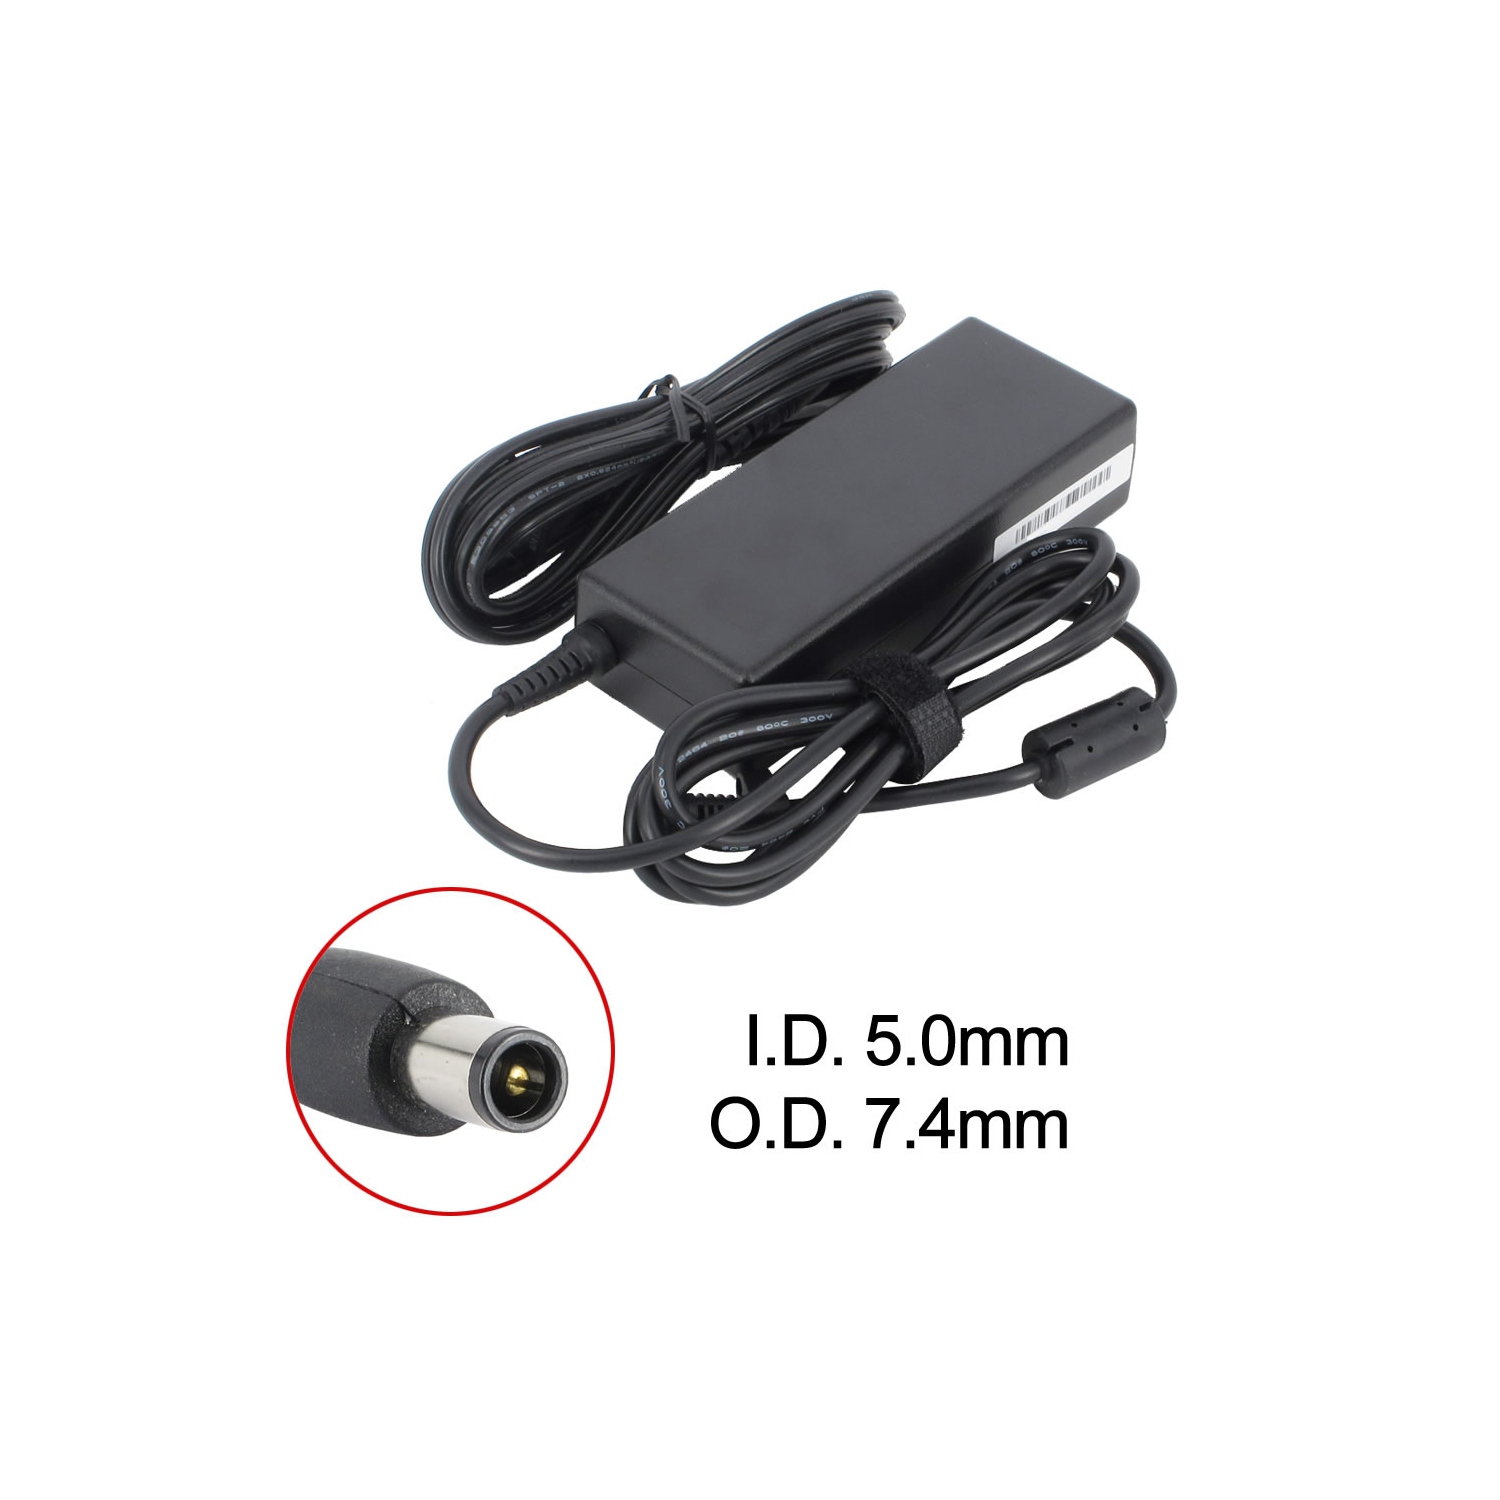 New Laptop AC Adapter for HP Pavilion dv6-4000, 391173-001, 463552-003, 577051-001, ED494AAR, PA-1900-08H2, PPP014L-S